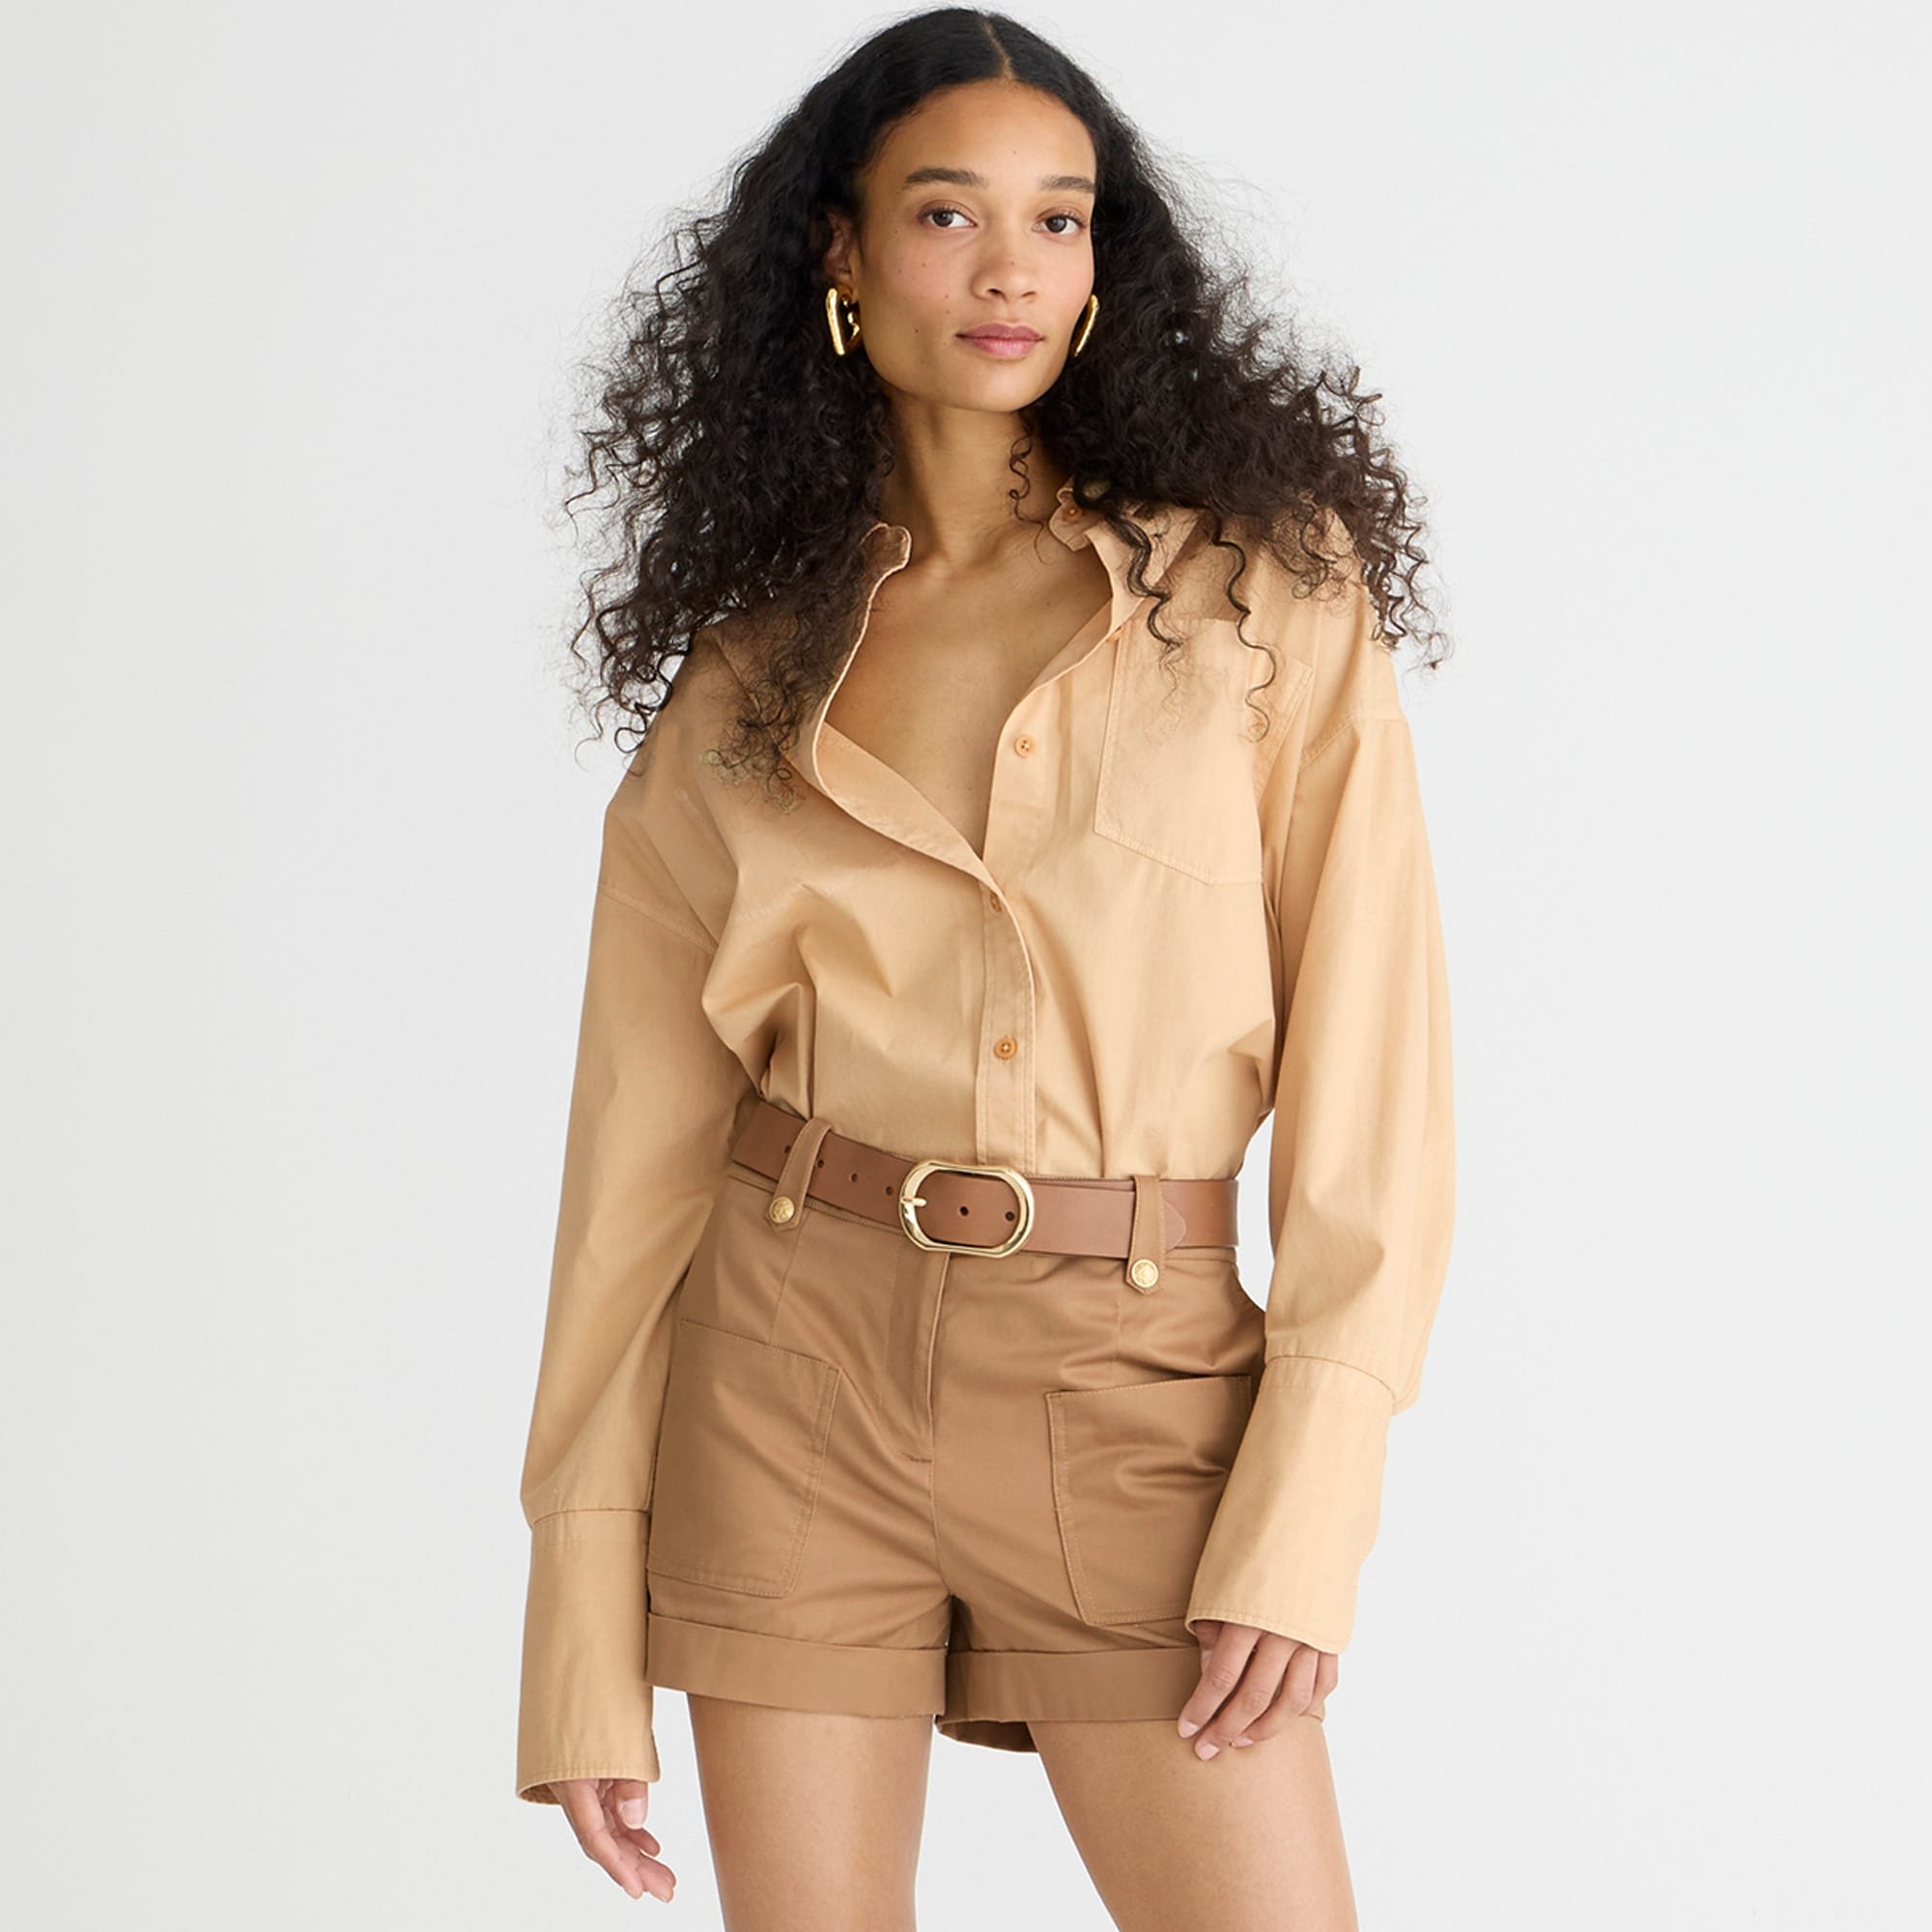 womens Patch-pocket suit short in lightweight chino